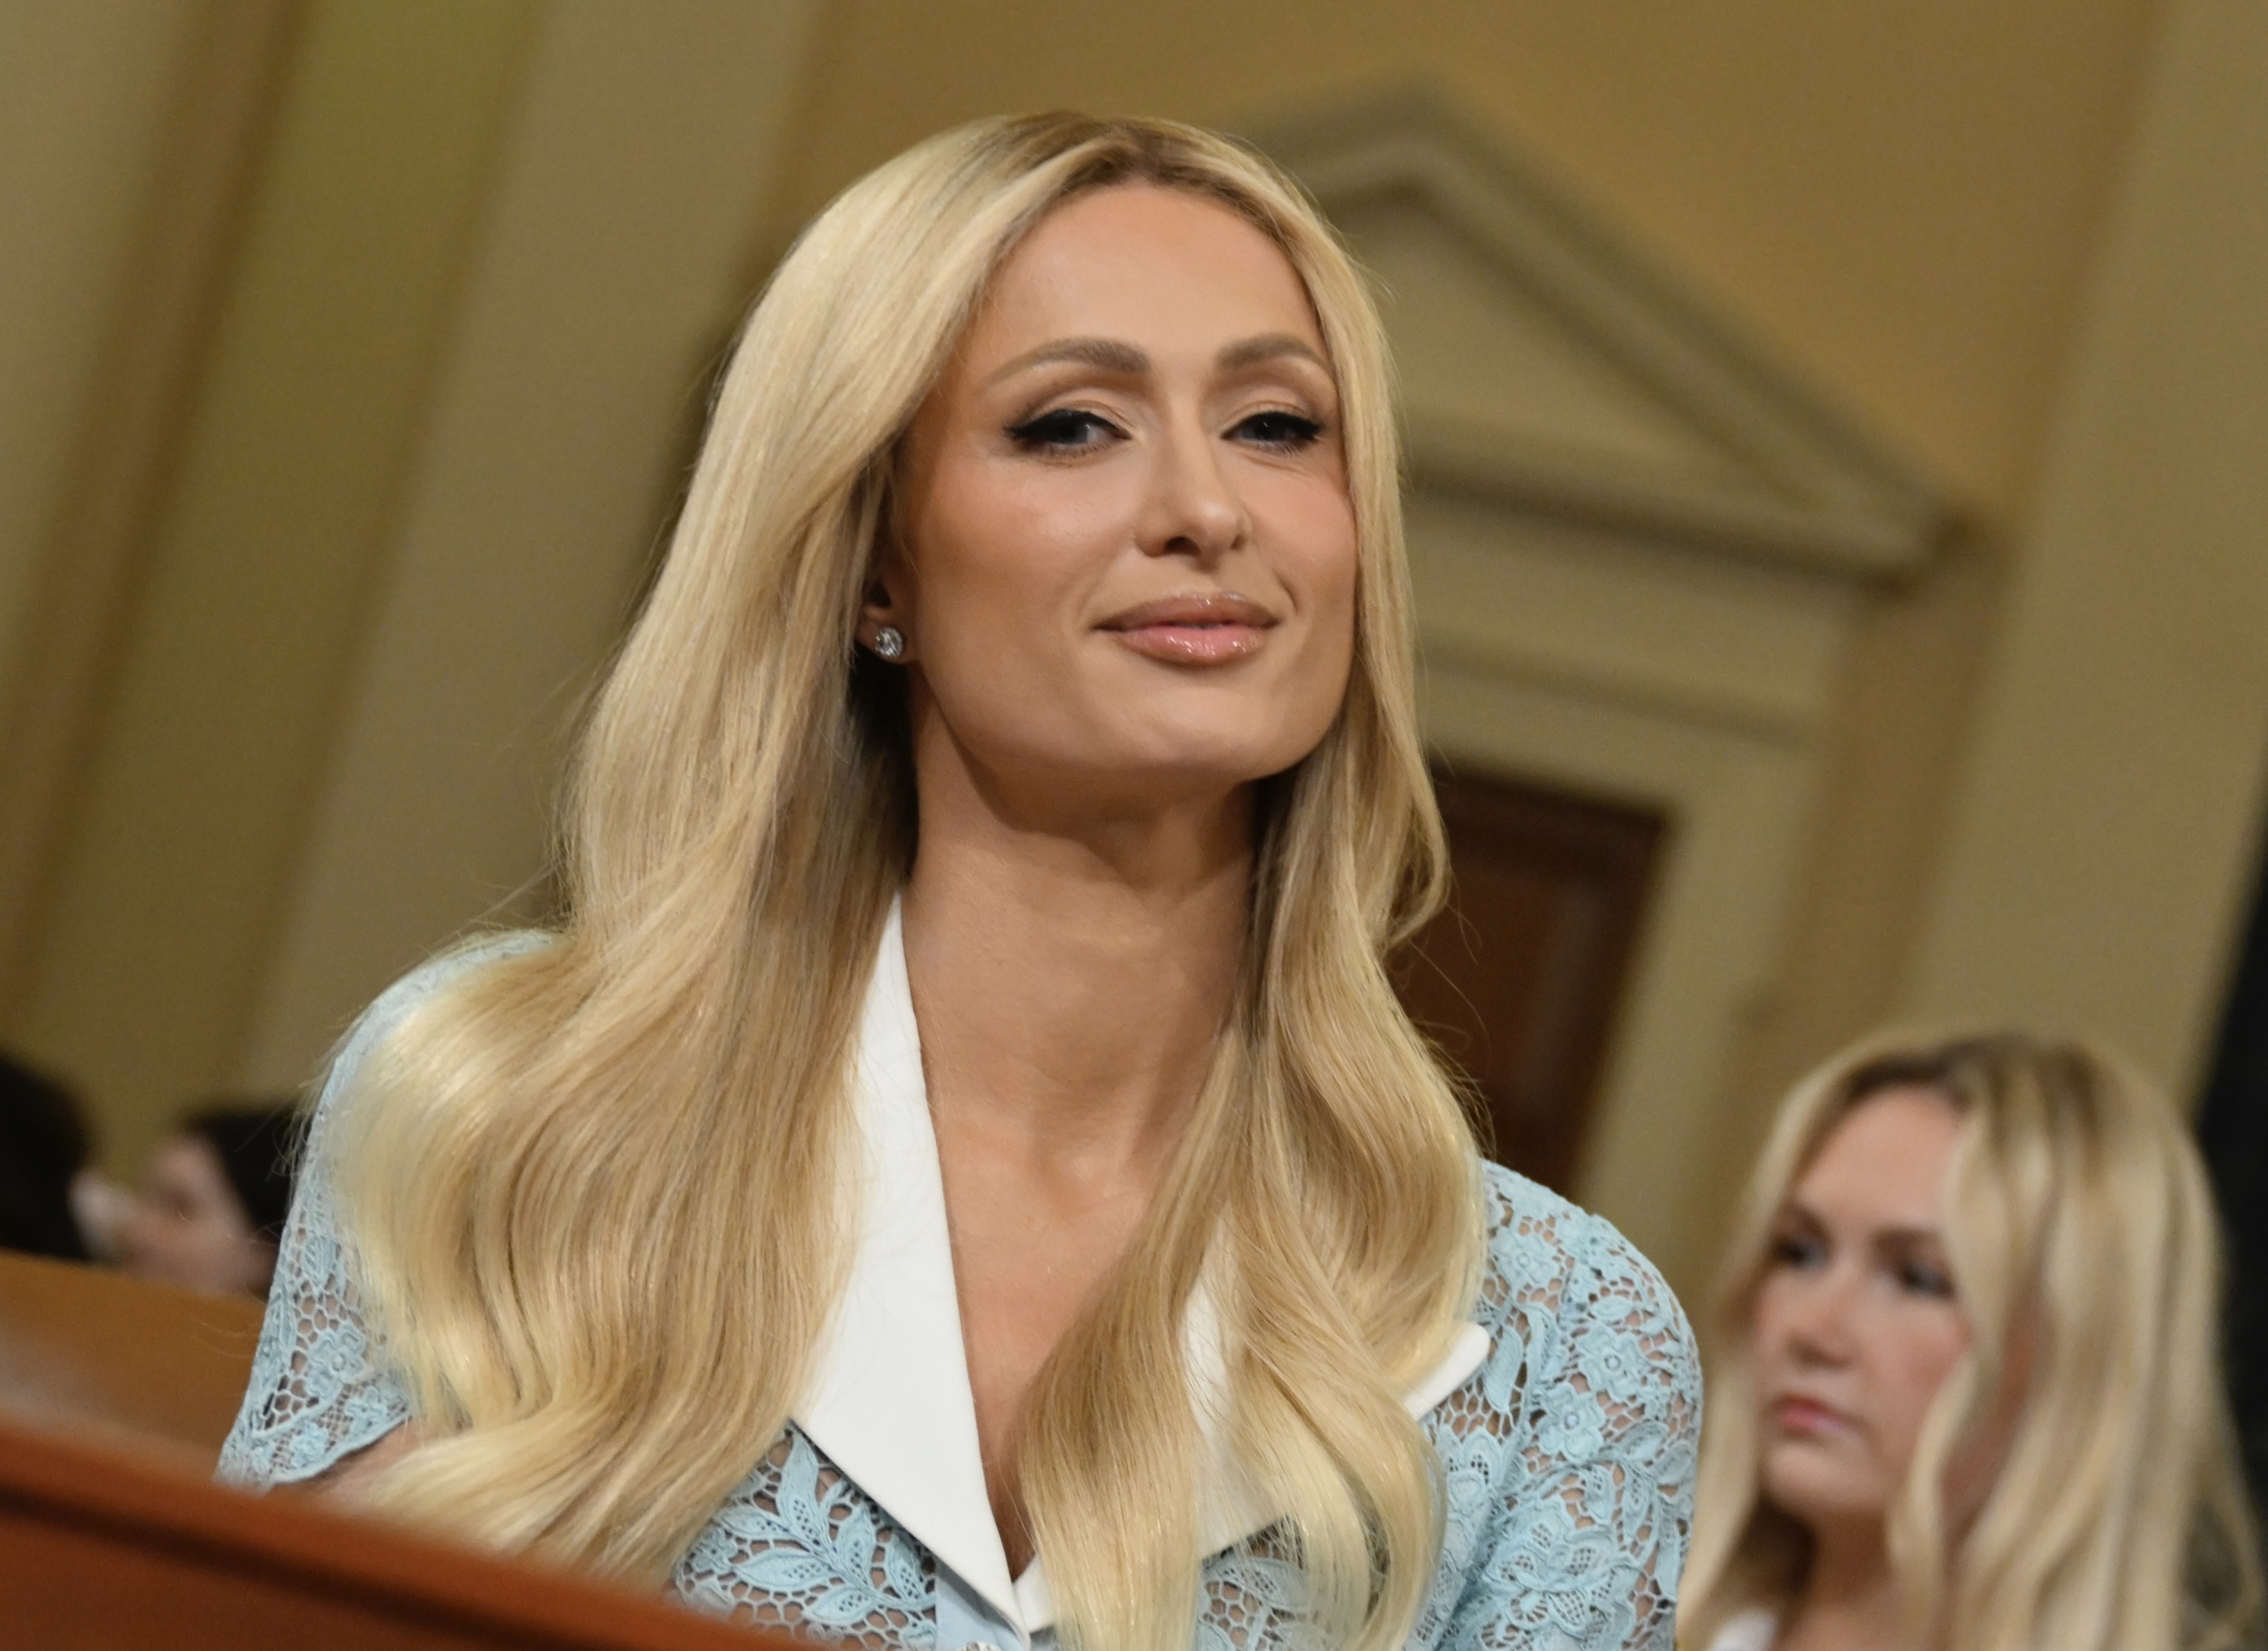 On Wednesday, Paris Hilton was pictured sitting at the US Capitol